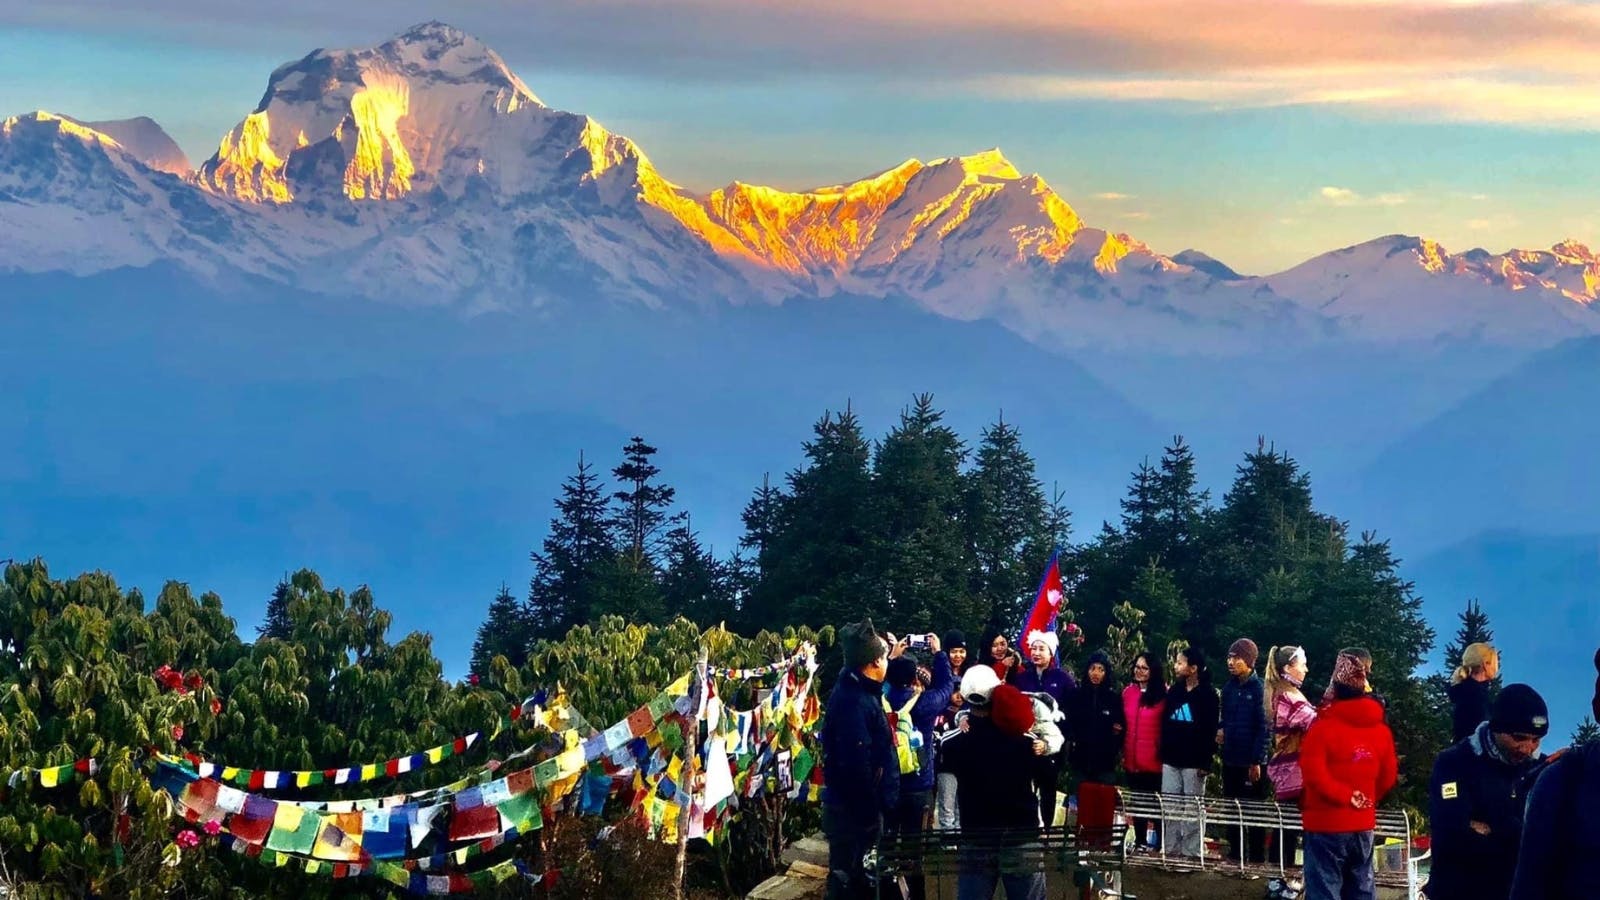 Sunrise at Poon Hill with Mt. Dhaulagiri